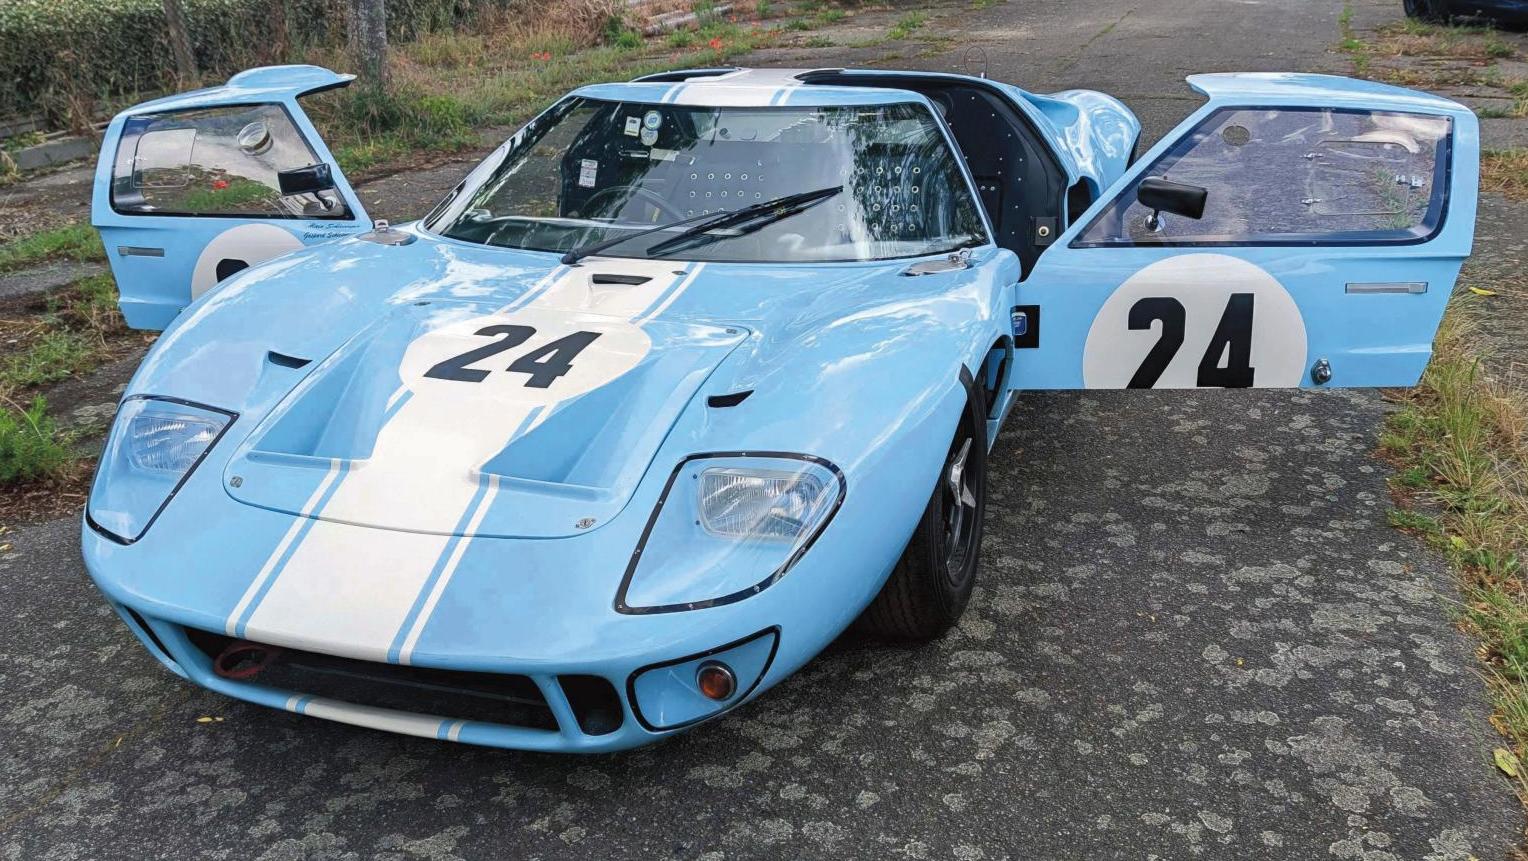 Ford GT 40, Mark III, châssis n° 1113, vers 1968-1969. Estimation : 800 000/1 20... Ford GT40, une sportive historique